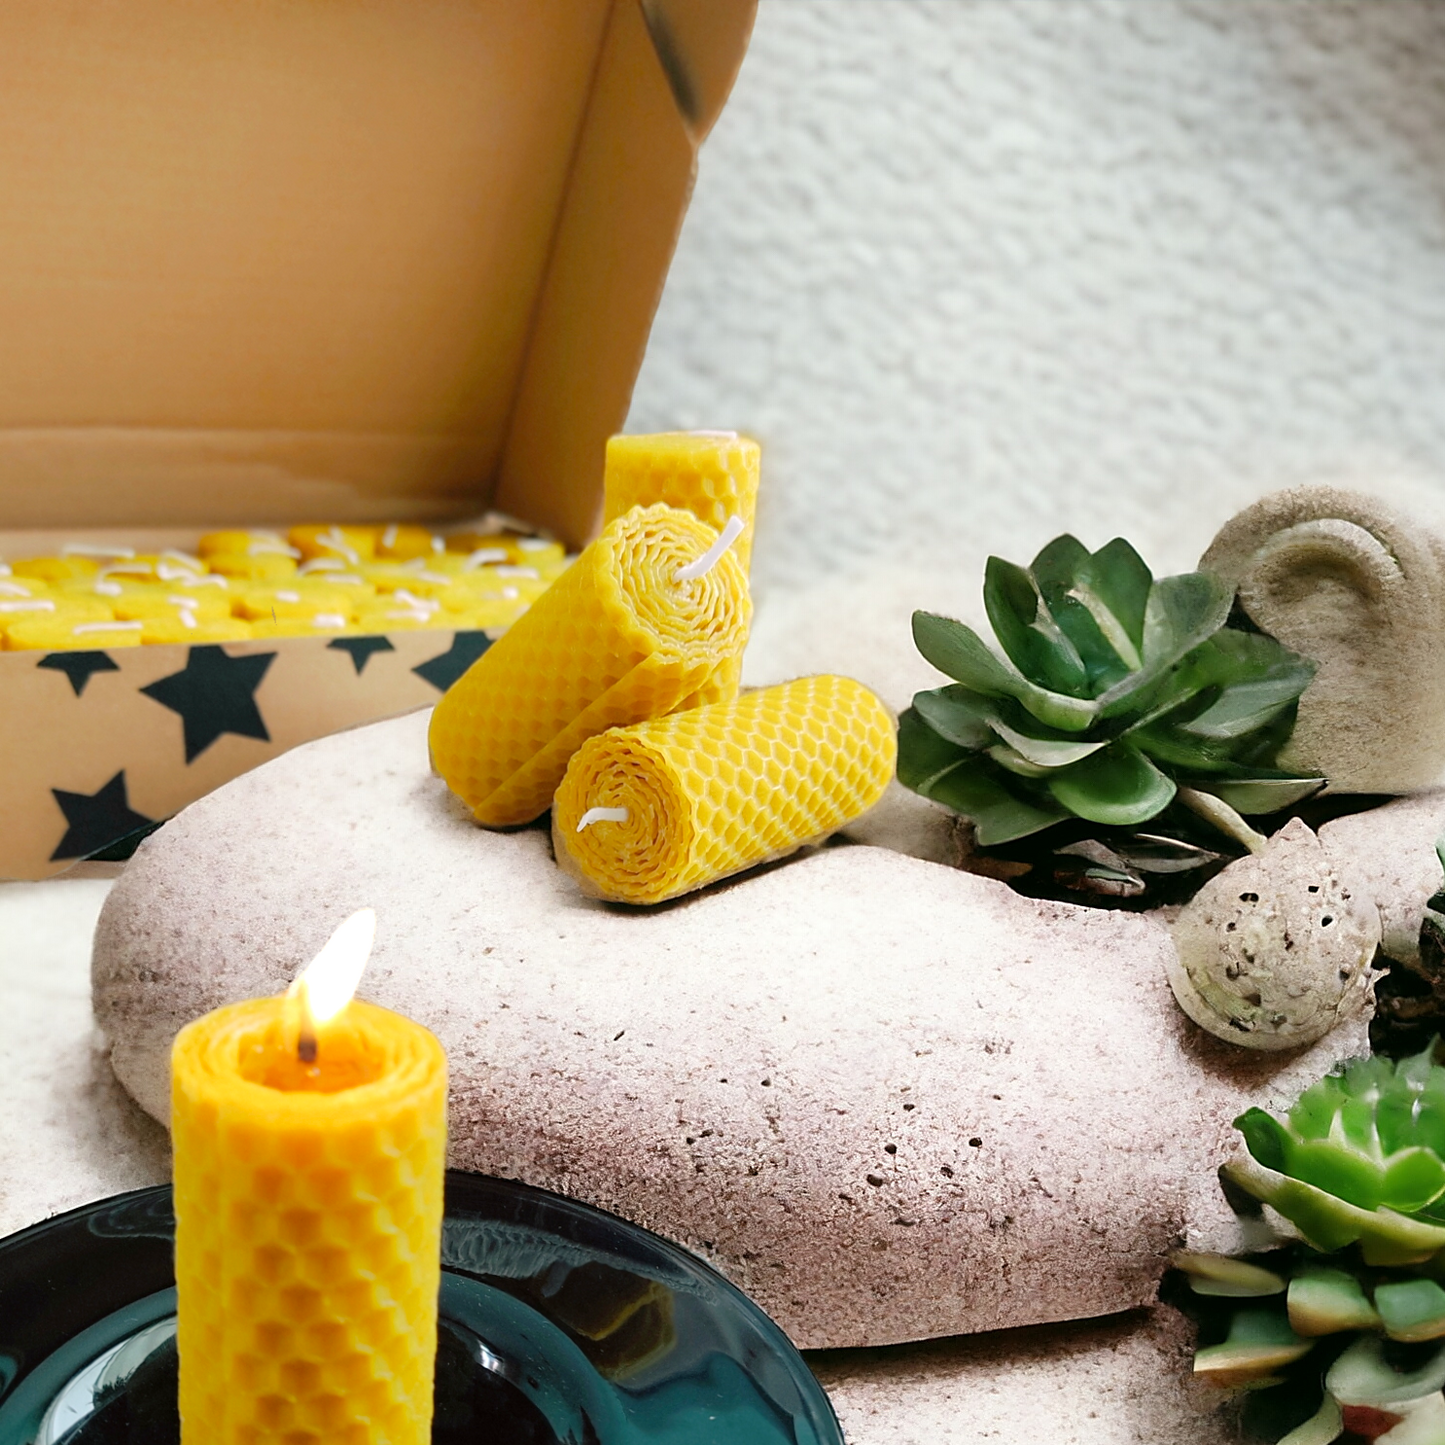 Wholesale Honeycomb Beeswax Candles, Handmade Candles